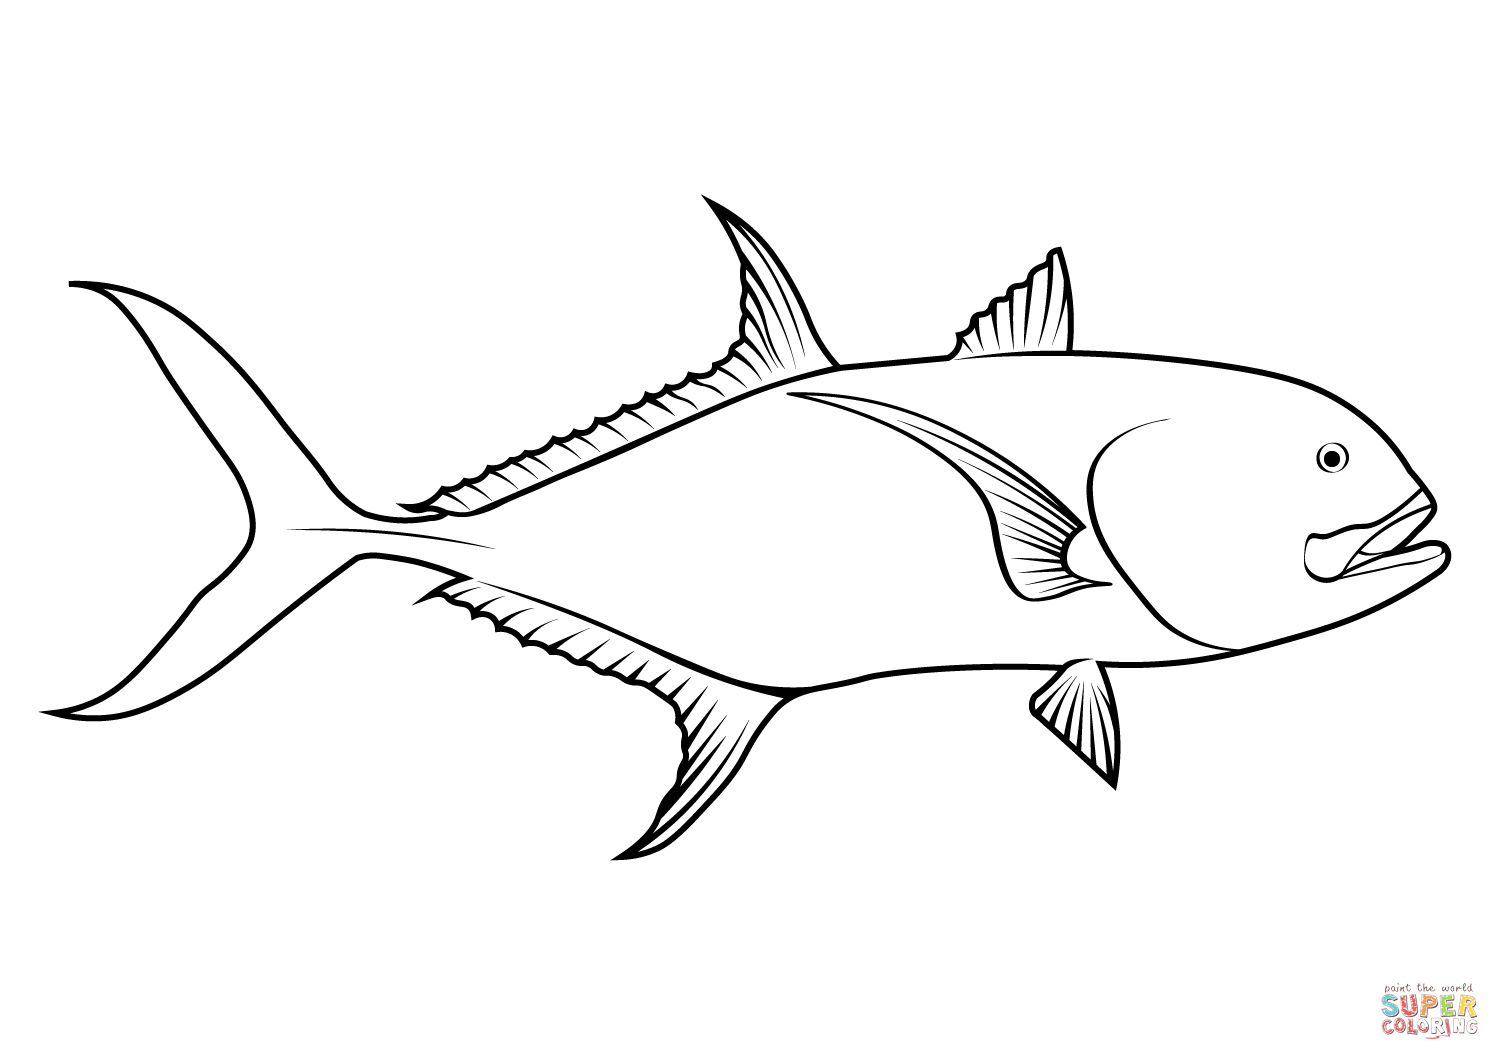 Yellow crevalle jack caranx hippos coloring page free printable coloring pages